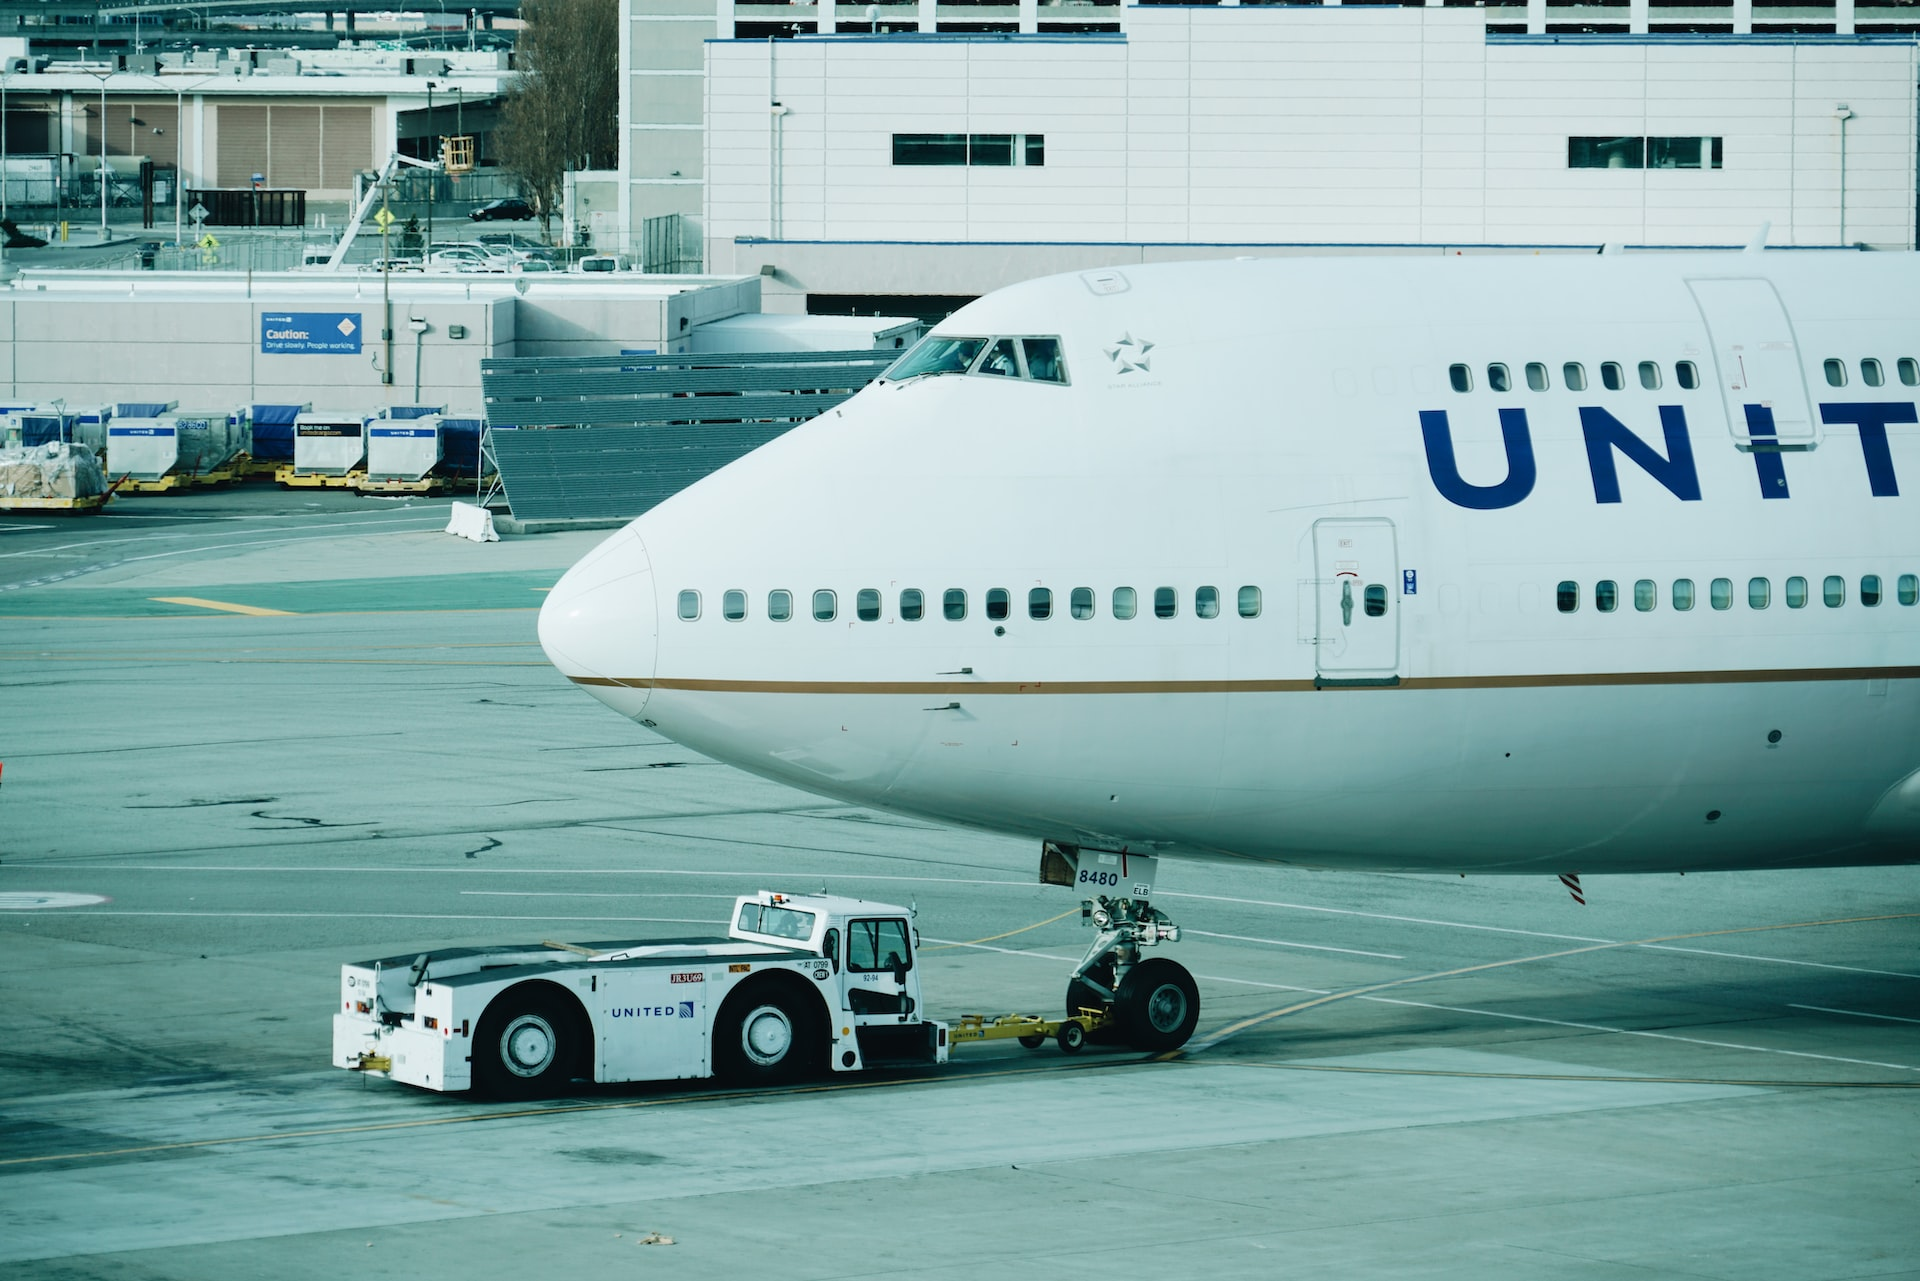 Legacy carrier United Airlines' aircraft being towed.